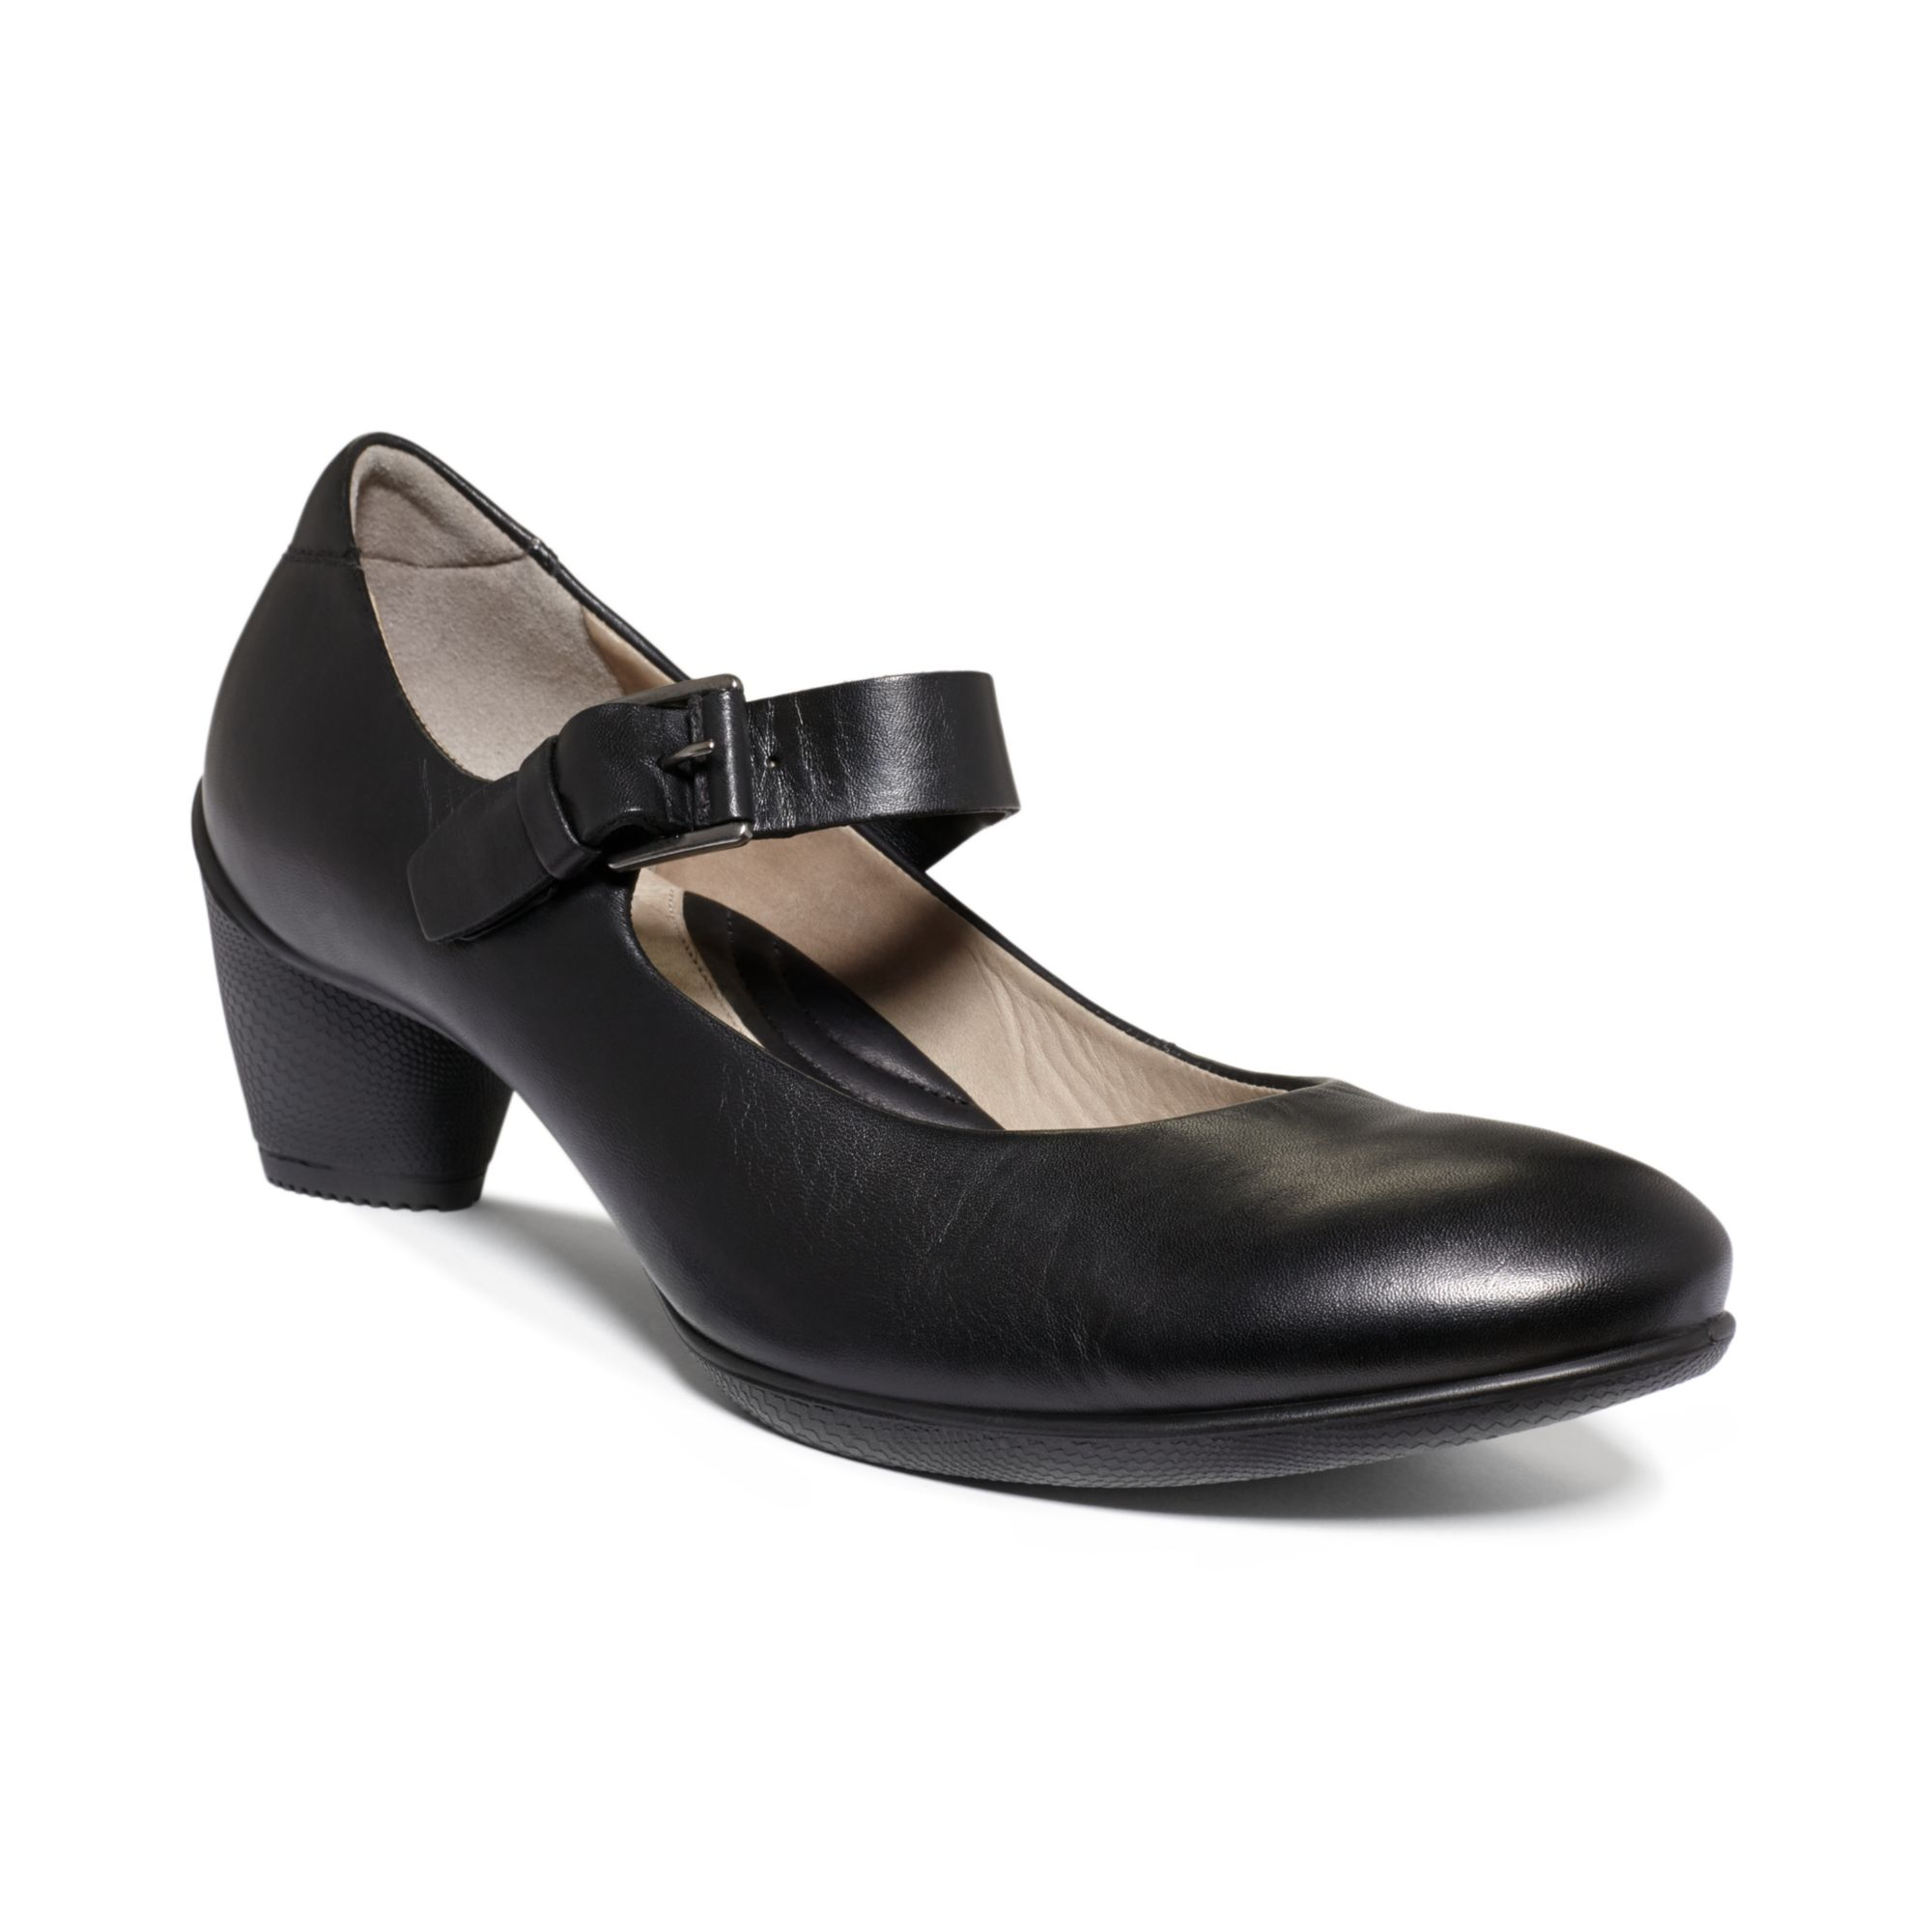 Ecco Sculptured 45 Mary Jane Pumps in Black - Lyst